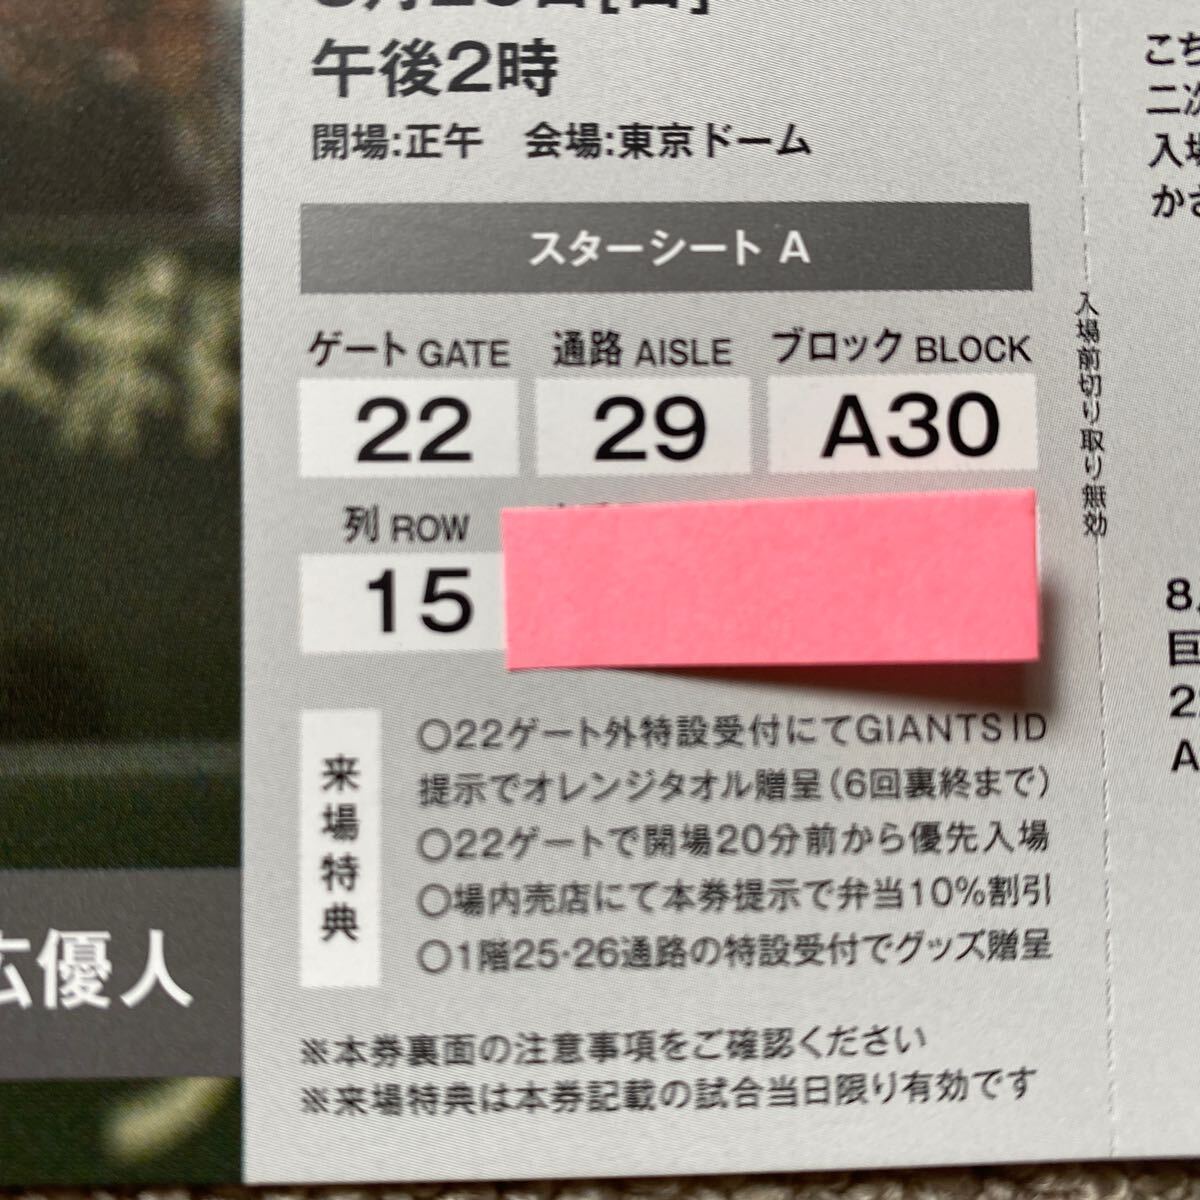 . person vs middle day 8/25( day ) Star seat A. middle day bench reverse side. real quality 12 row through . close 2 sheets ream number seat.. place privilege equipped regular price and downward start 14 hour ~ Tokyo Dome 